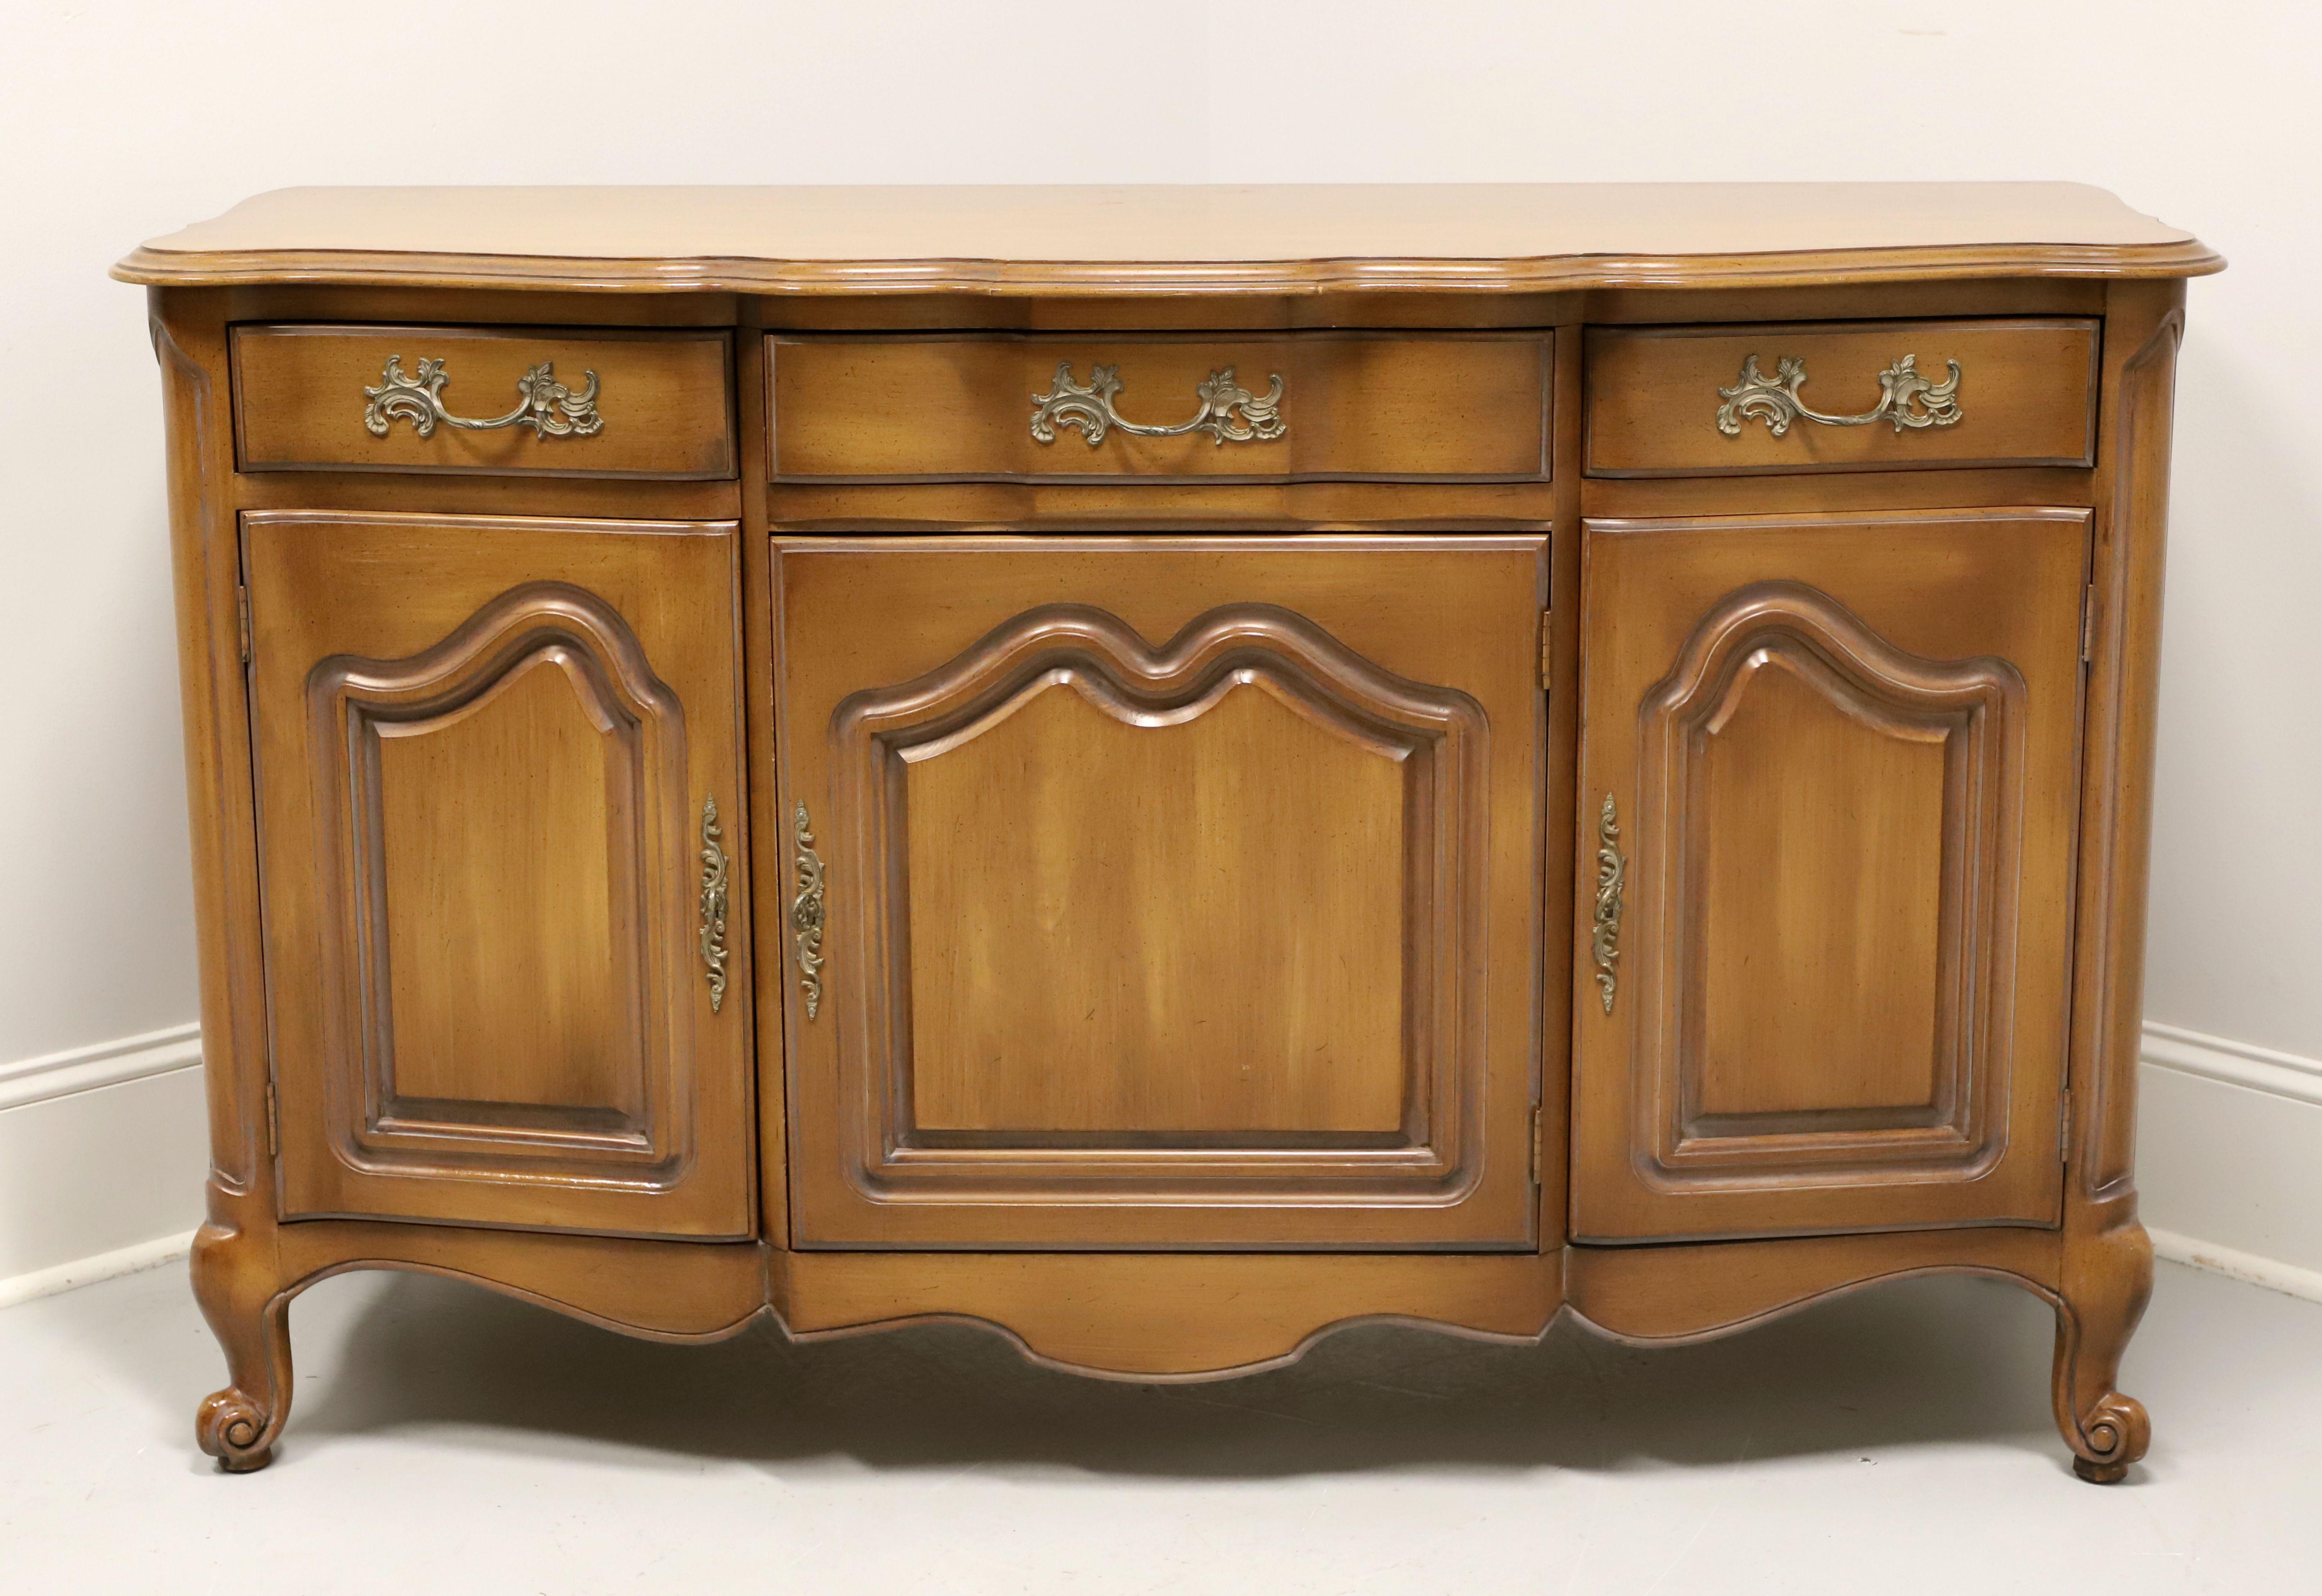 A French Provincial Louis XV style credenza by White Furniture. Solid cherry wood with their Old Spice finish, ogee edge to the top, serpentine shape, brass hardware, carved door fronts, carved apron, and scroll feet. Features three drawers of